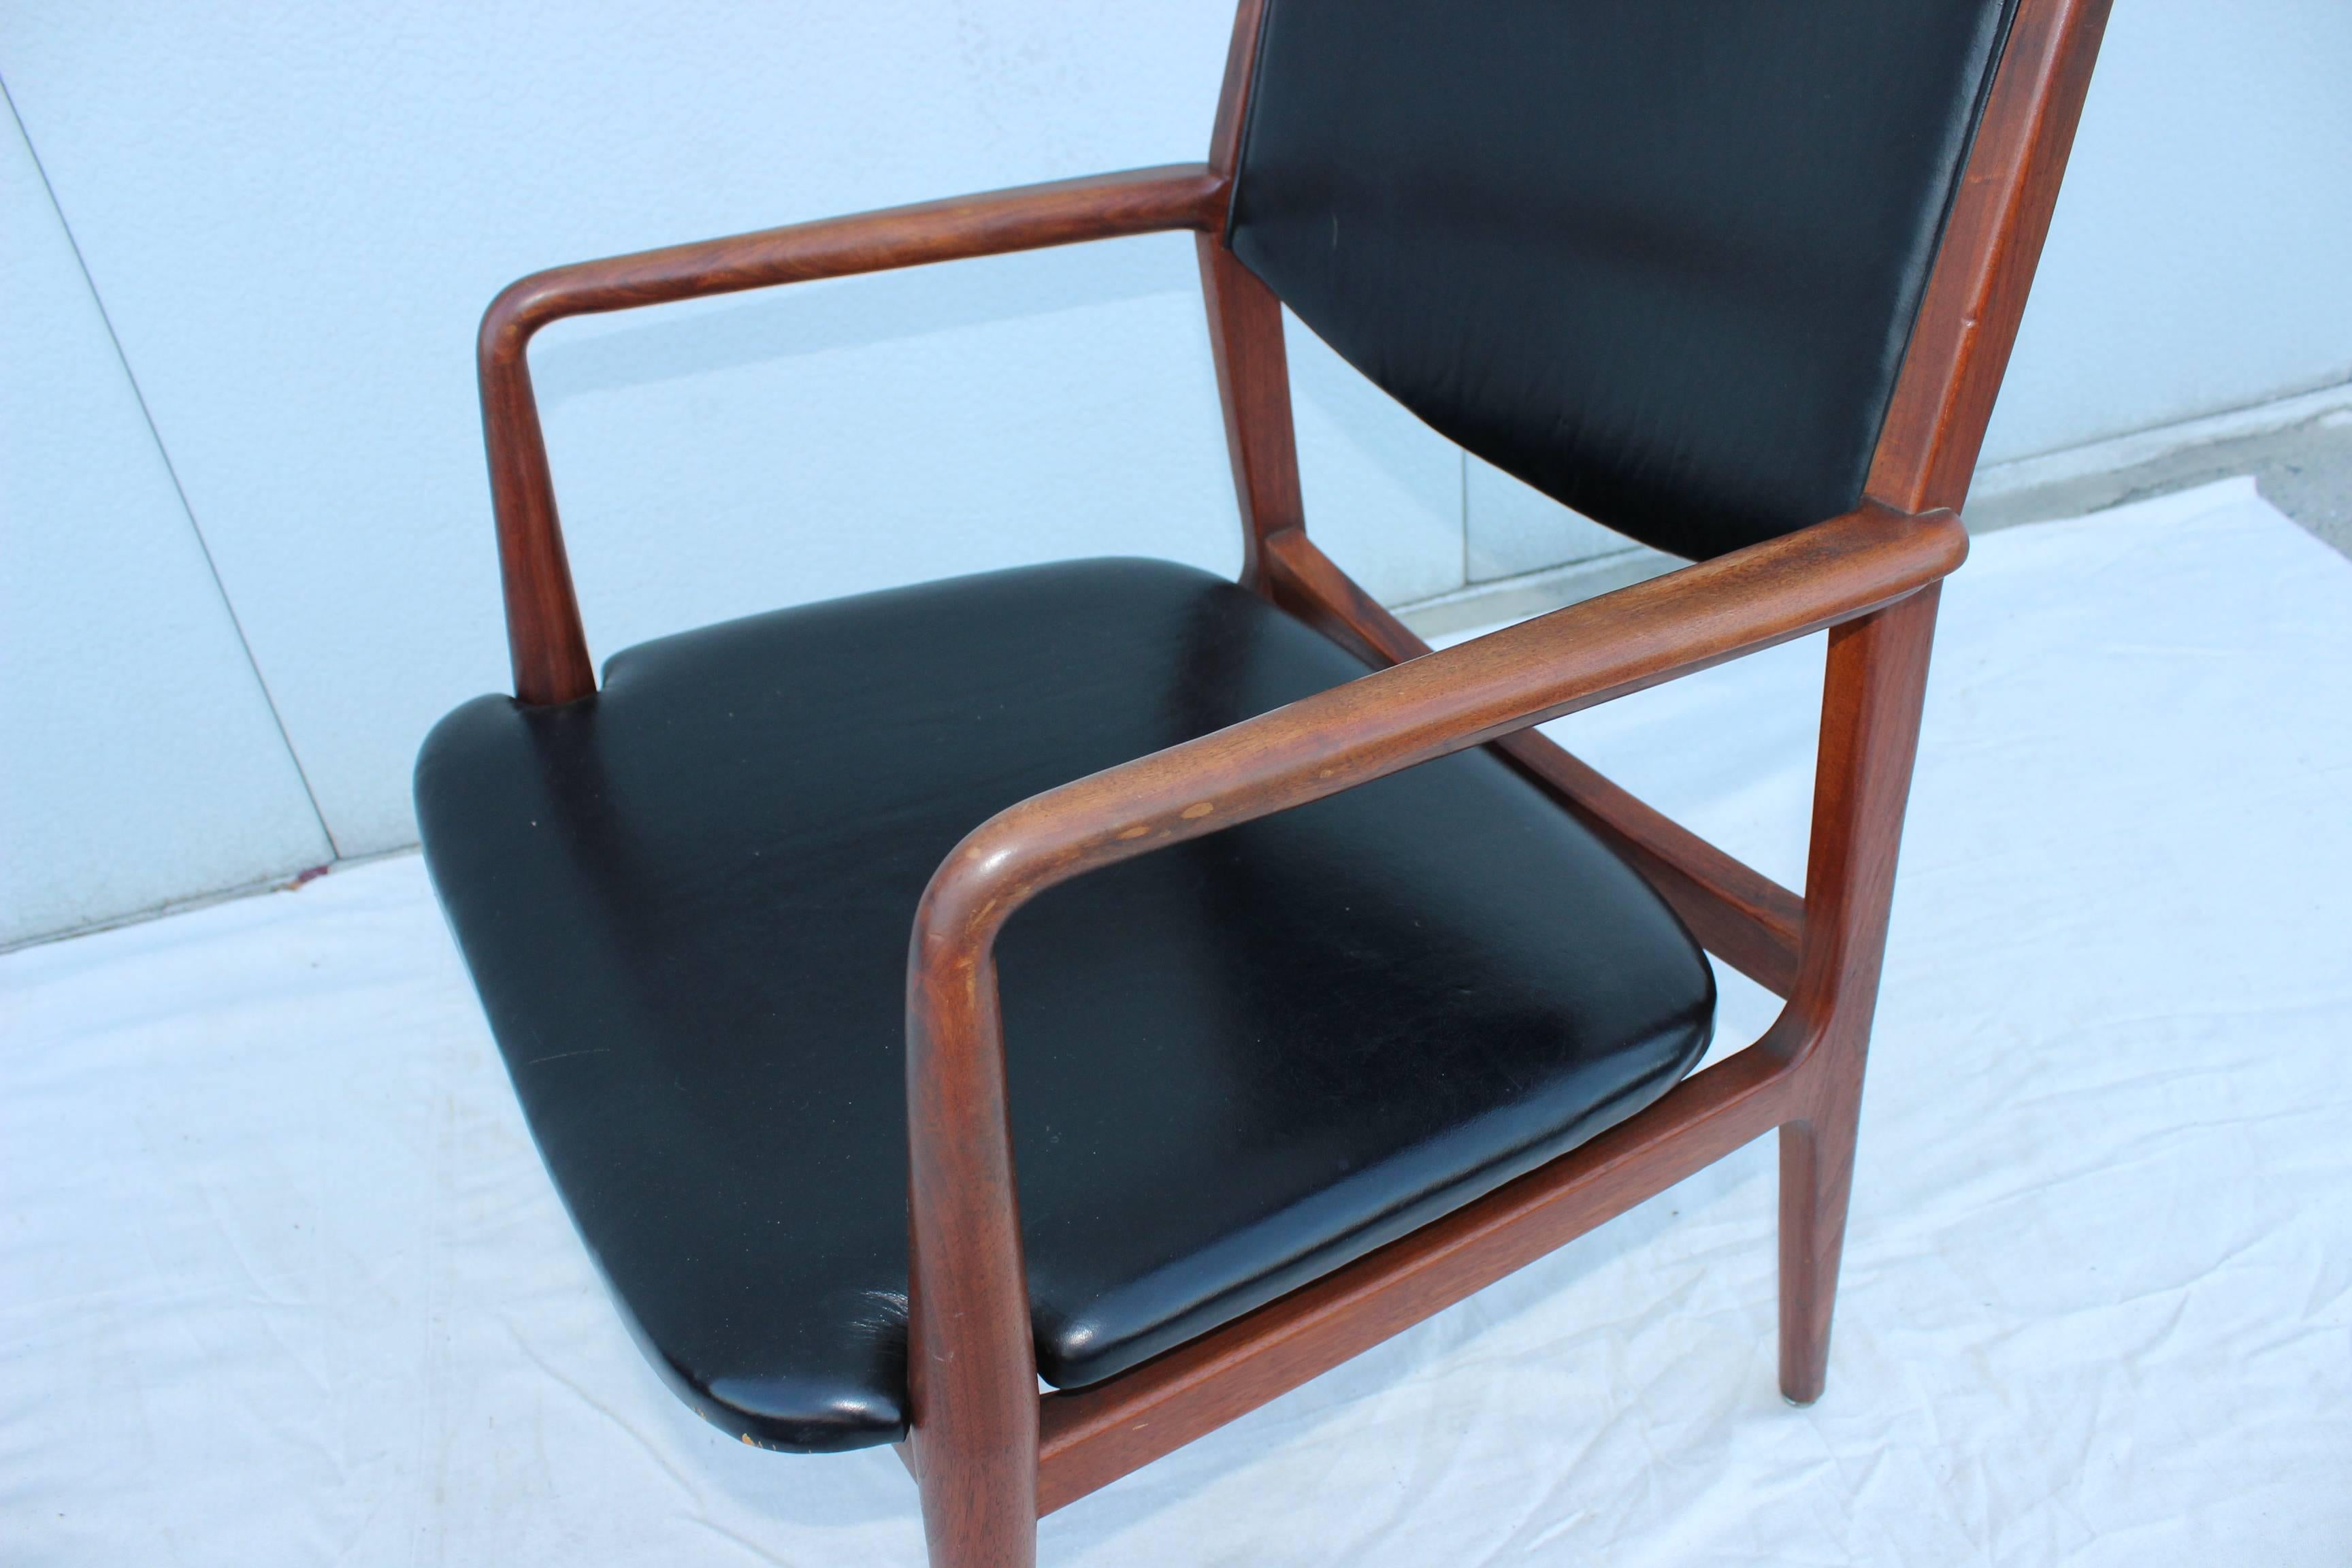 1950s leather and walnut with brass sabots modernist armchairs. Designed by George Reinoehl for Stow Davis.